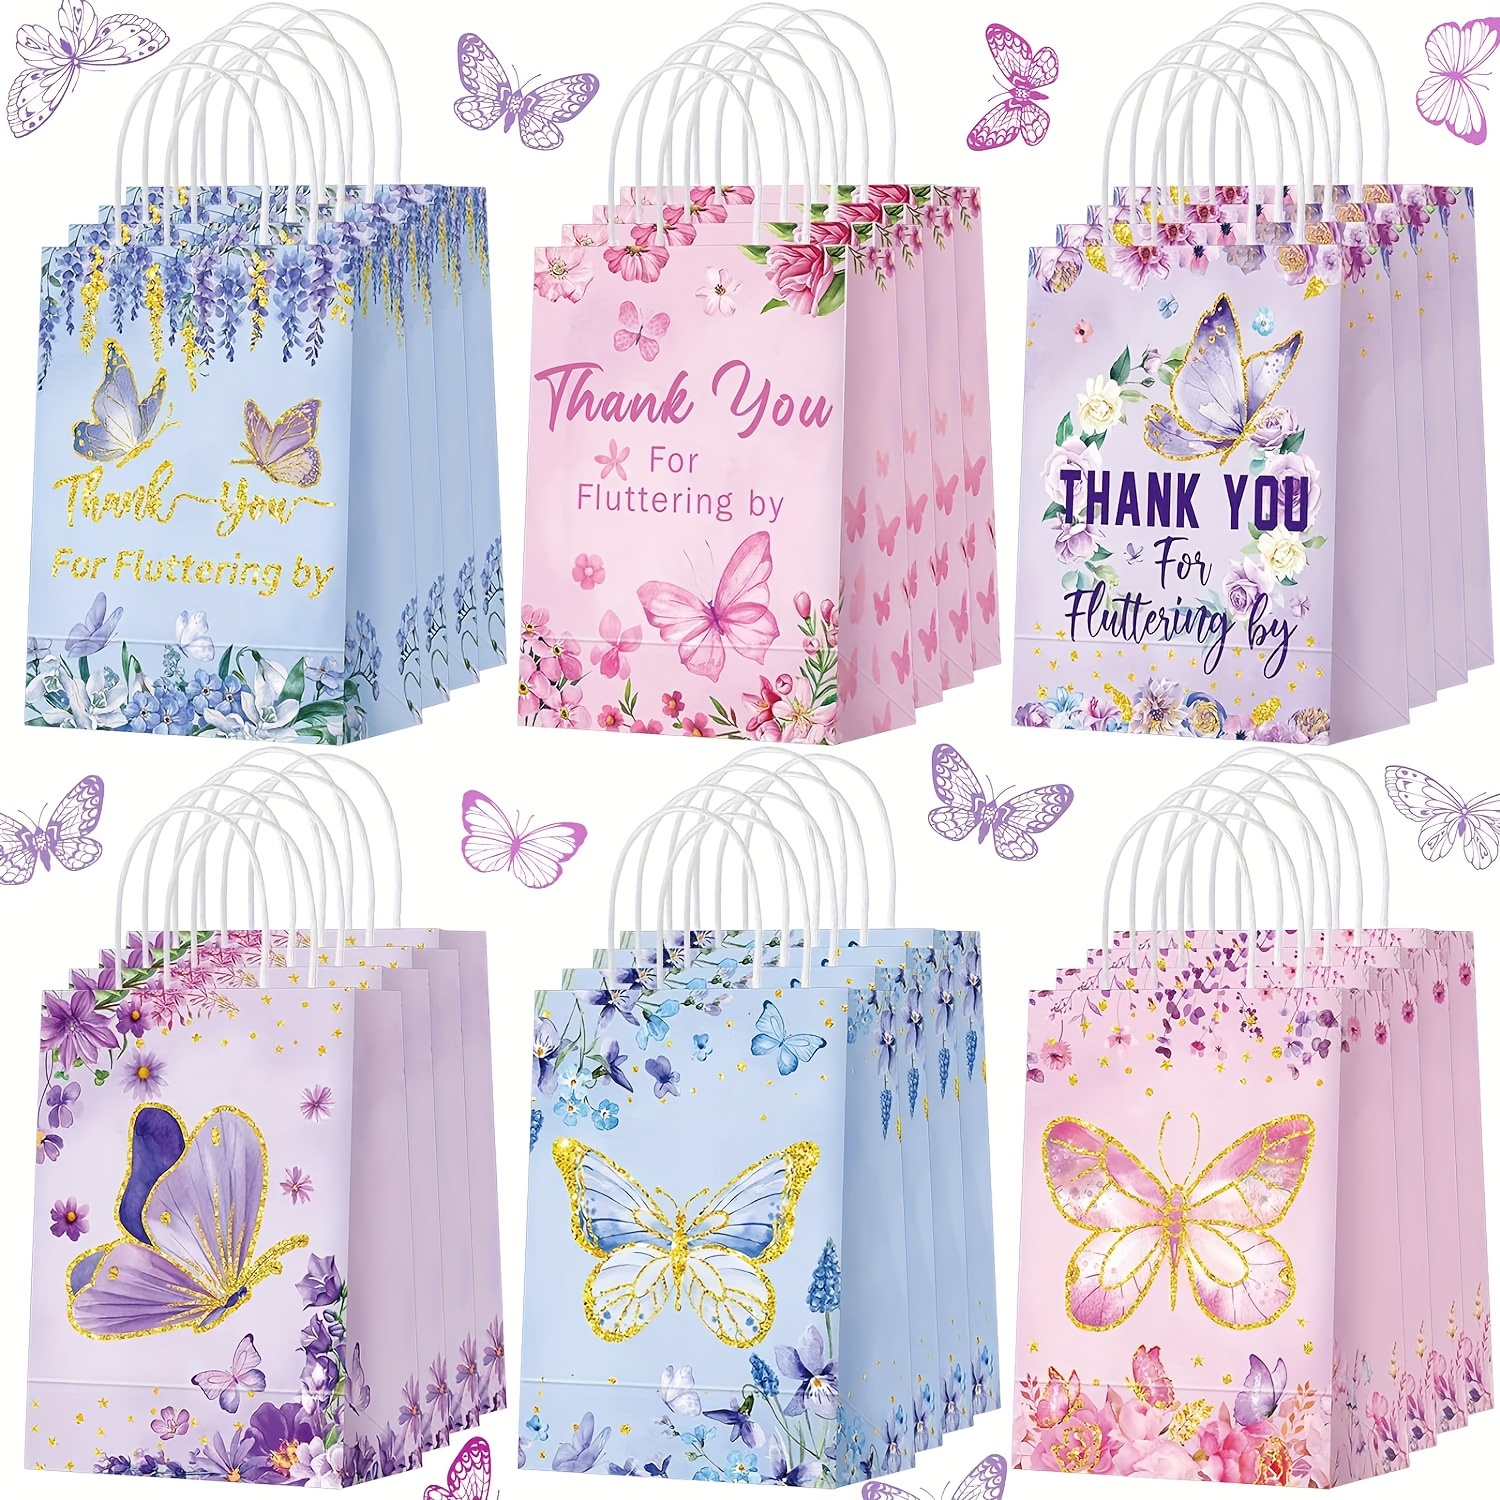 

24pcs, Butterfly Party Favors Butterfly Gift Bags Pink Purple Flowers Candy Treat Goodie Bags Thank You For Fluttering By Paper Bags With Handles For Birthday Party Supplies Baby Shower